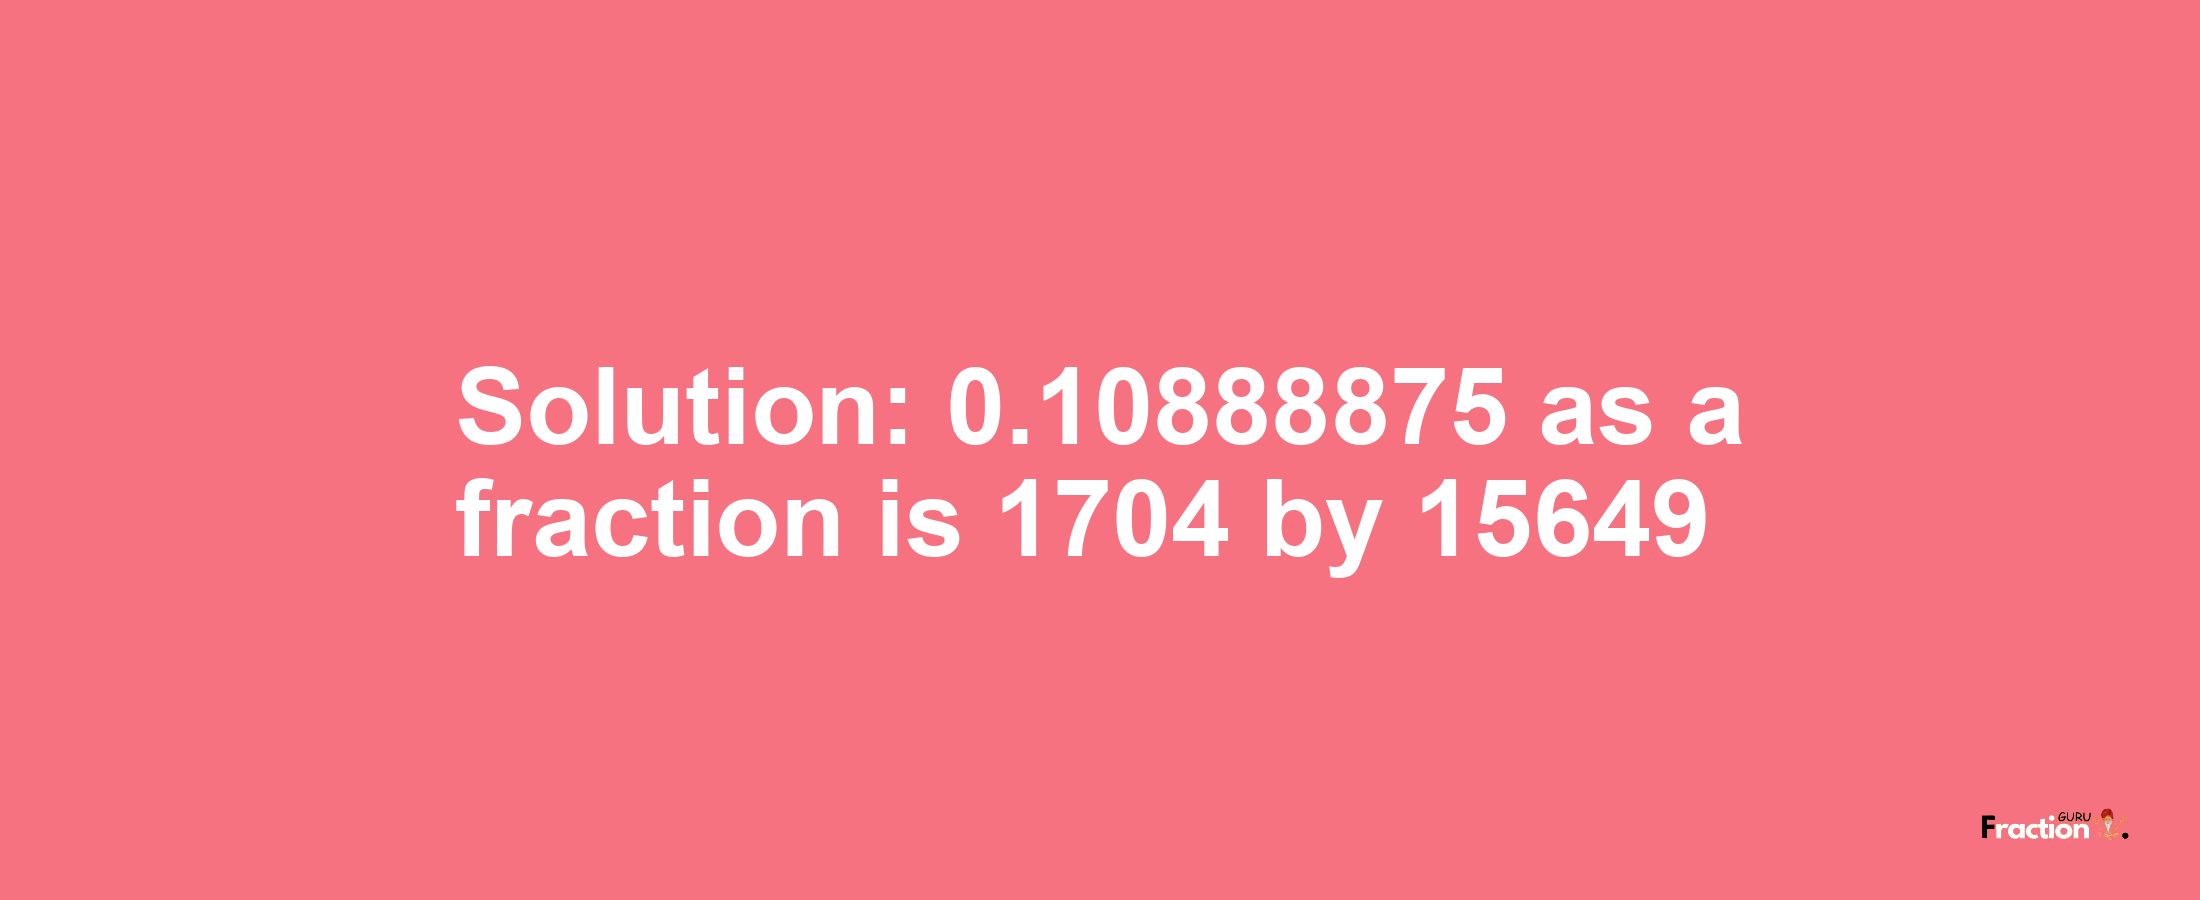 Solution:0.10888875 as a fraction is 1704/15649